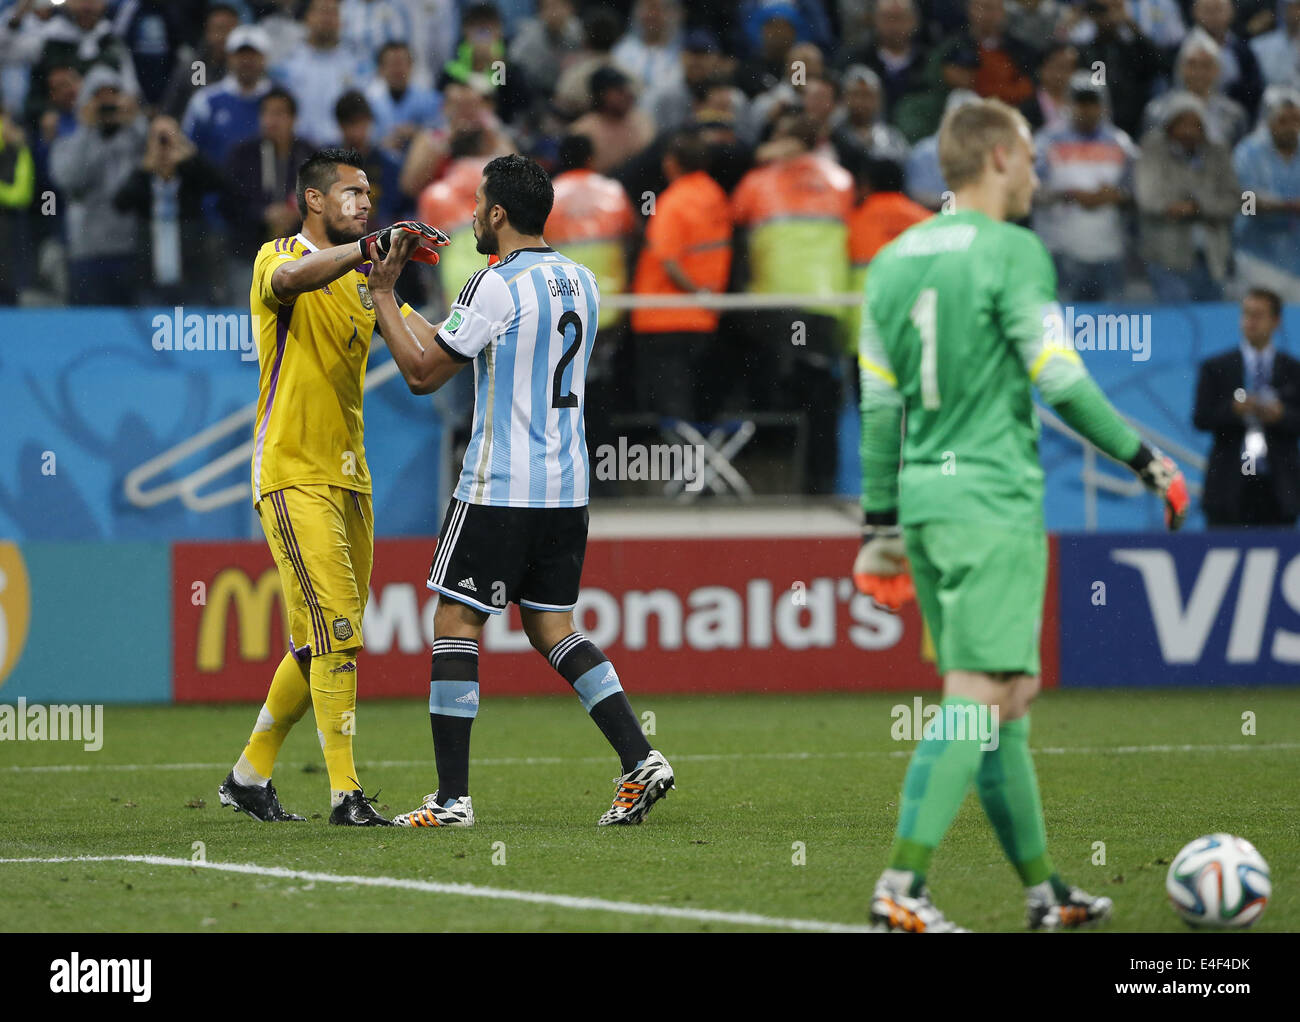 Sao Paulo, Brazil. 9th July, 2014. Argentina's Ezequiel Garay (C) celebrates with goalkeeper Sergio Romero (L) after scoring in the penalty shoot-out during a semifinal match between Netherlands and Argentina of 2014 FIFA World Cup at the Arena de Sao Paulo Stadium in Sao Paulo, Brazil, on July 9, 2014. Argentina won 4-2 on penalties over Netherlands after a 0-0 tie and qualified for the final on Wednesday. Credit:  Zhou Lei/Xinhua/Alamy Live News Stock Photo